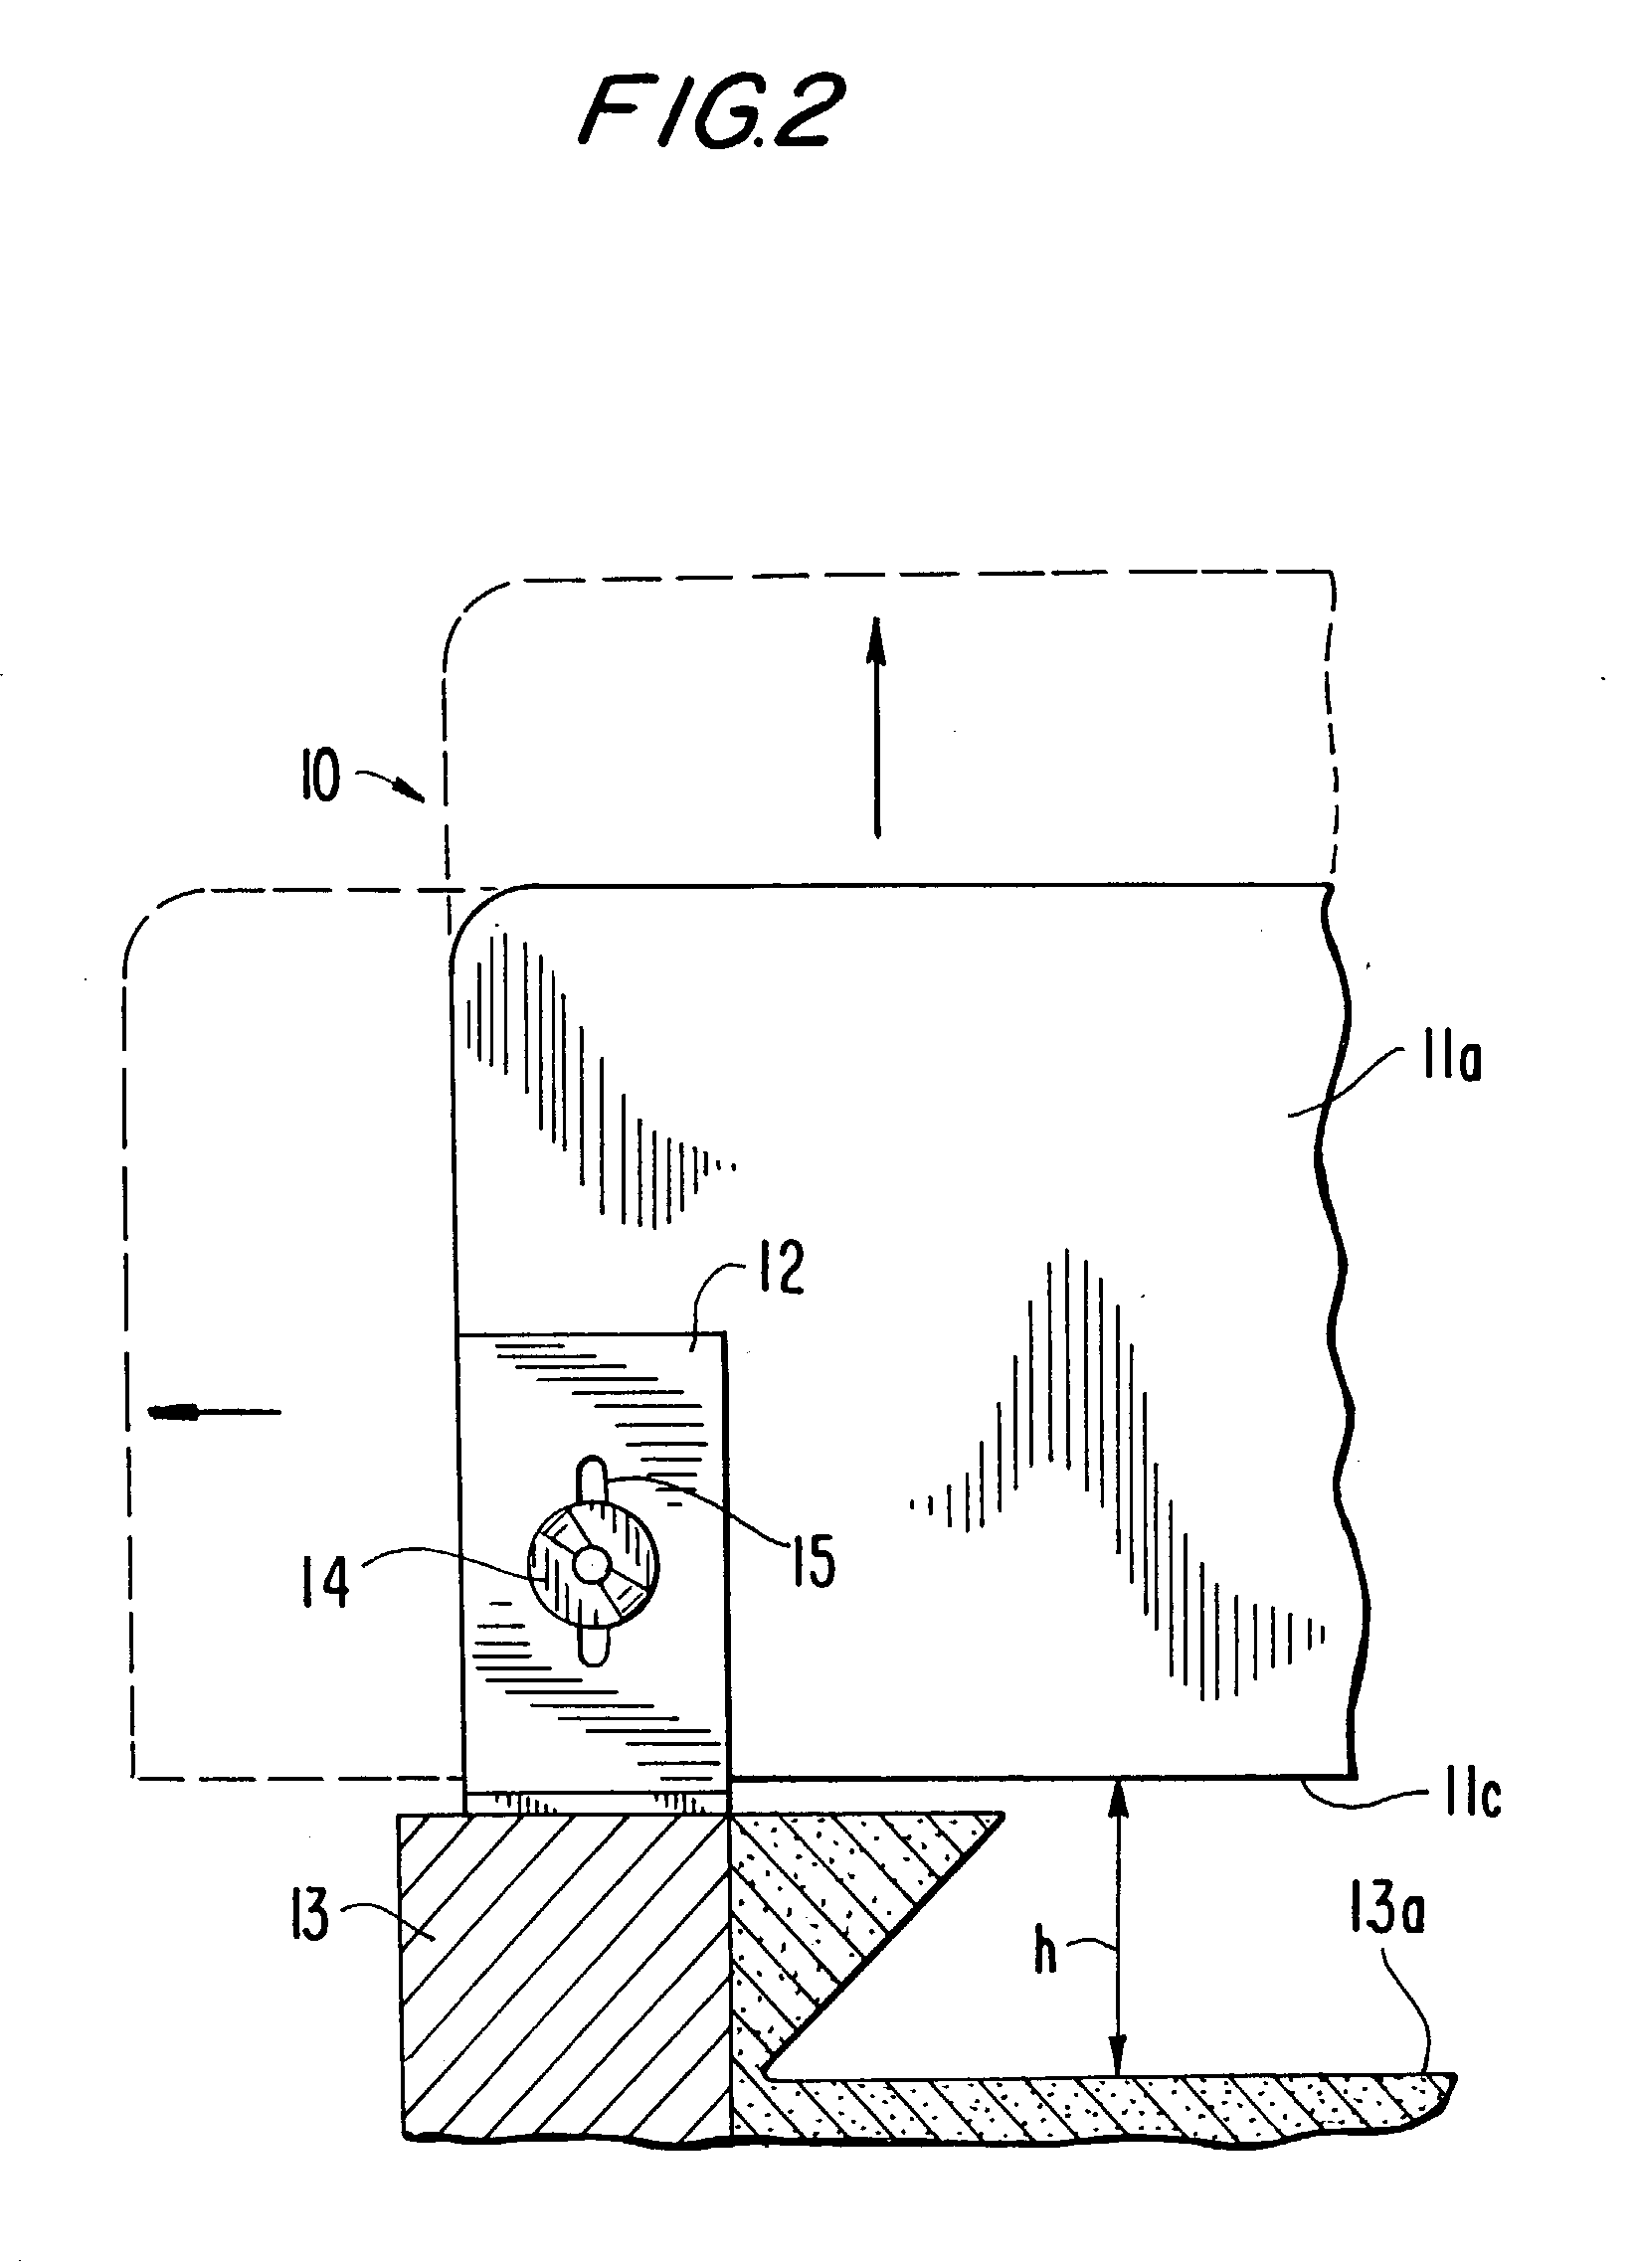 Training device and method for practicing playing pool